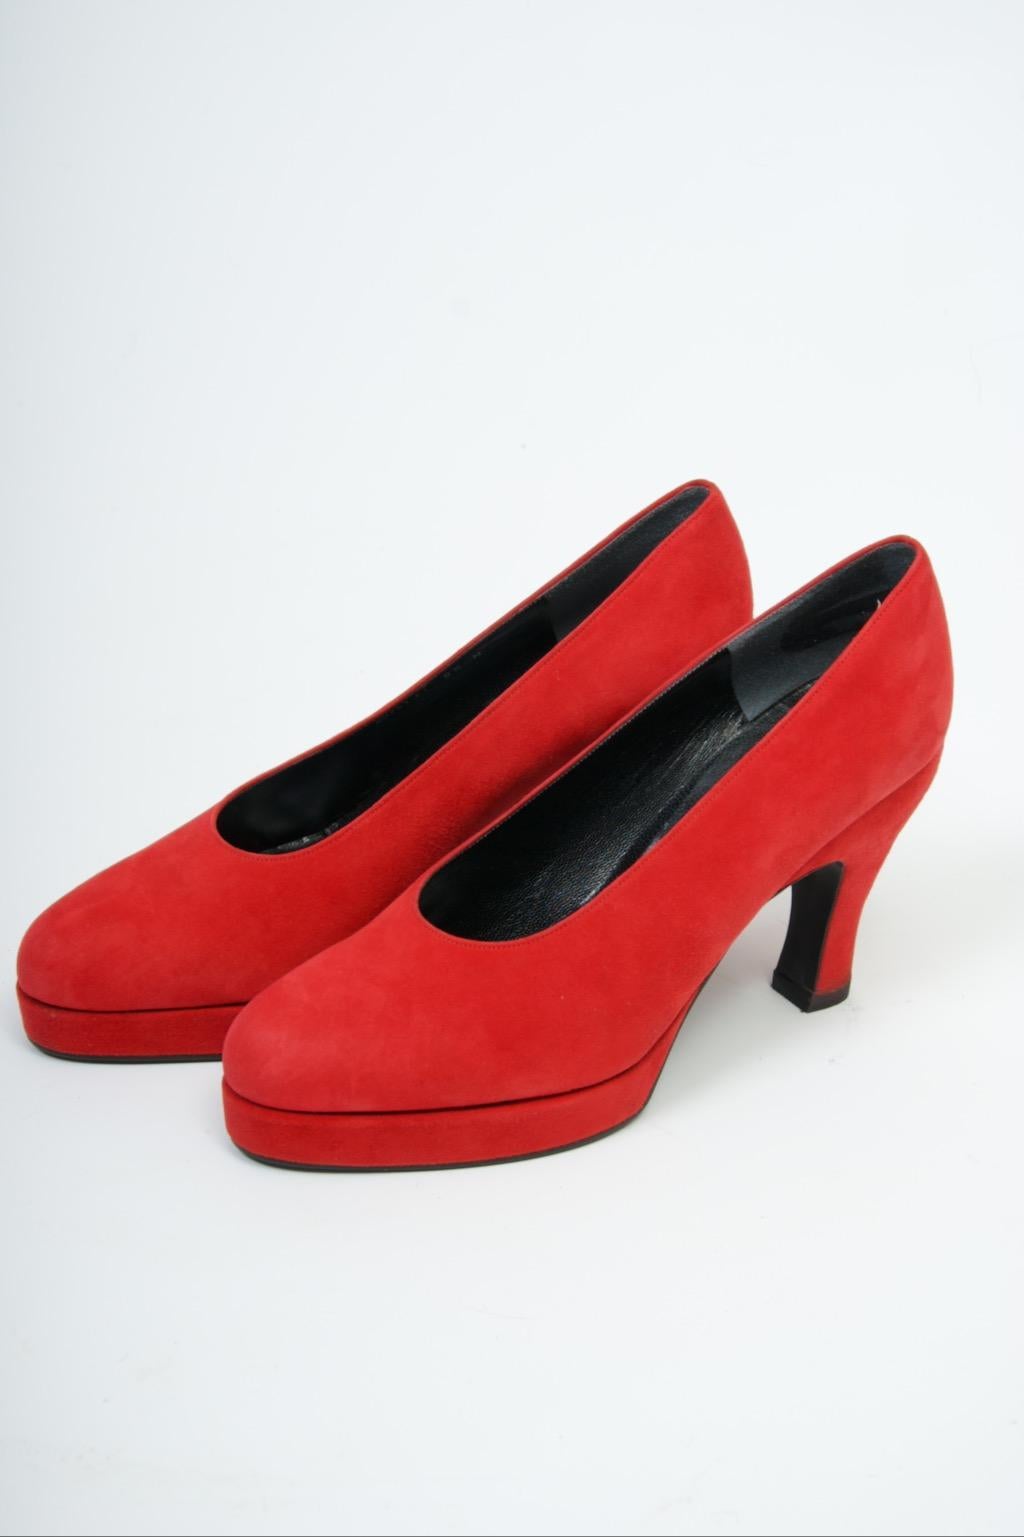 Karl Lagerfeld classic platform pumps in vivid red suede with oval vamp and rounded toe. The shaped heel has an indentation near the top. Black lining with Karl Lagerfeld script labels; fan logo on bottoms. Appear to be unworn, probably from the